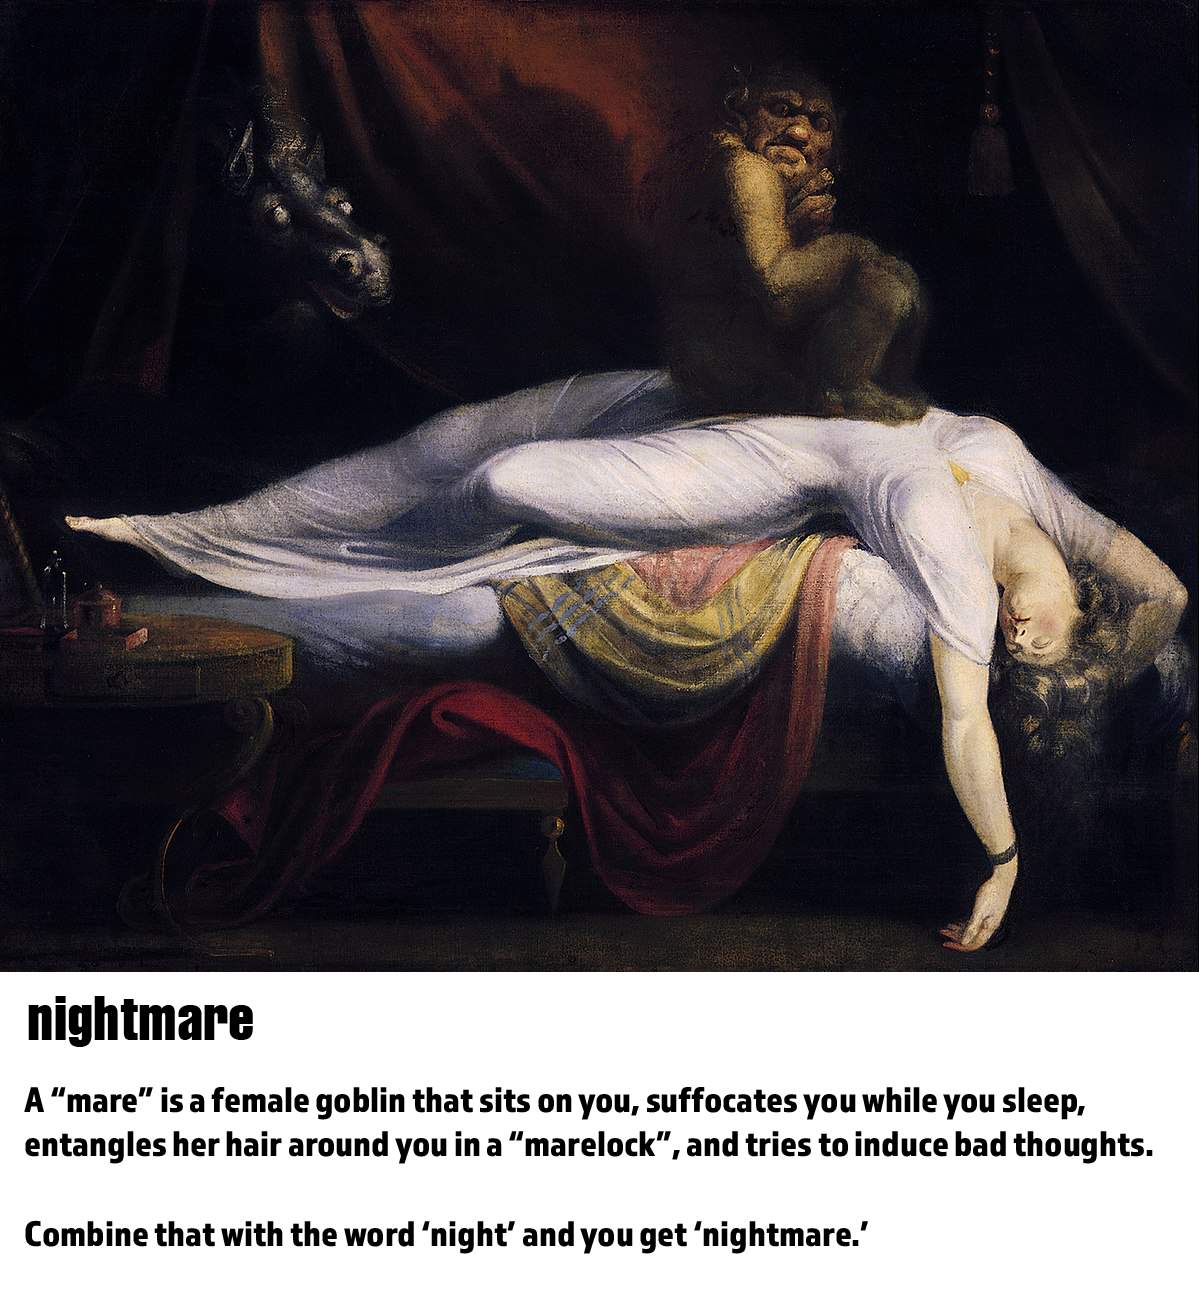 fun word origins history facts - nightmare - a mare is a female goblin that sits on your chest